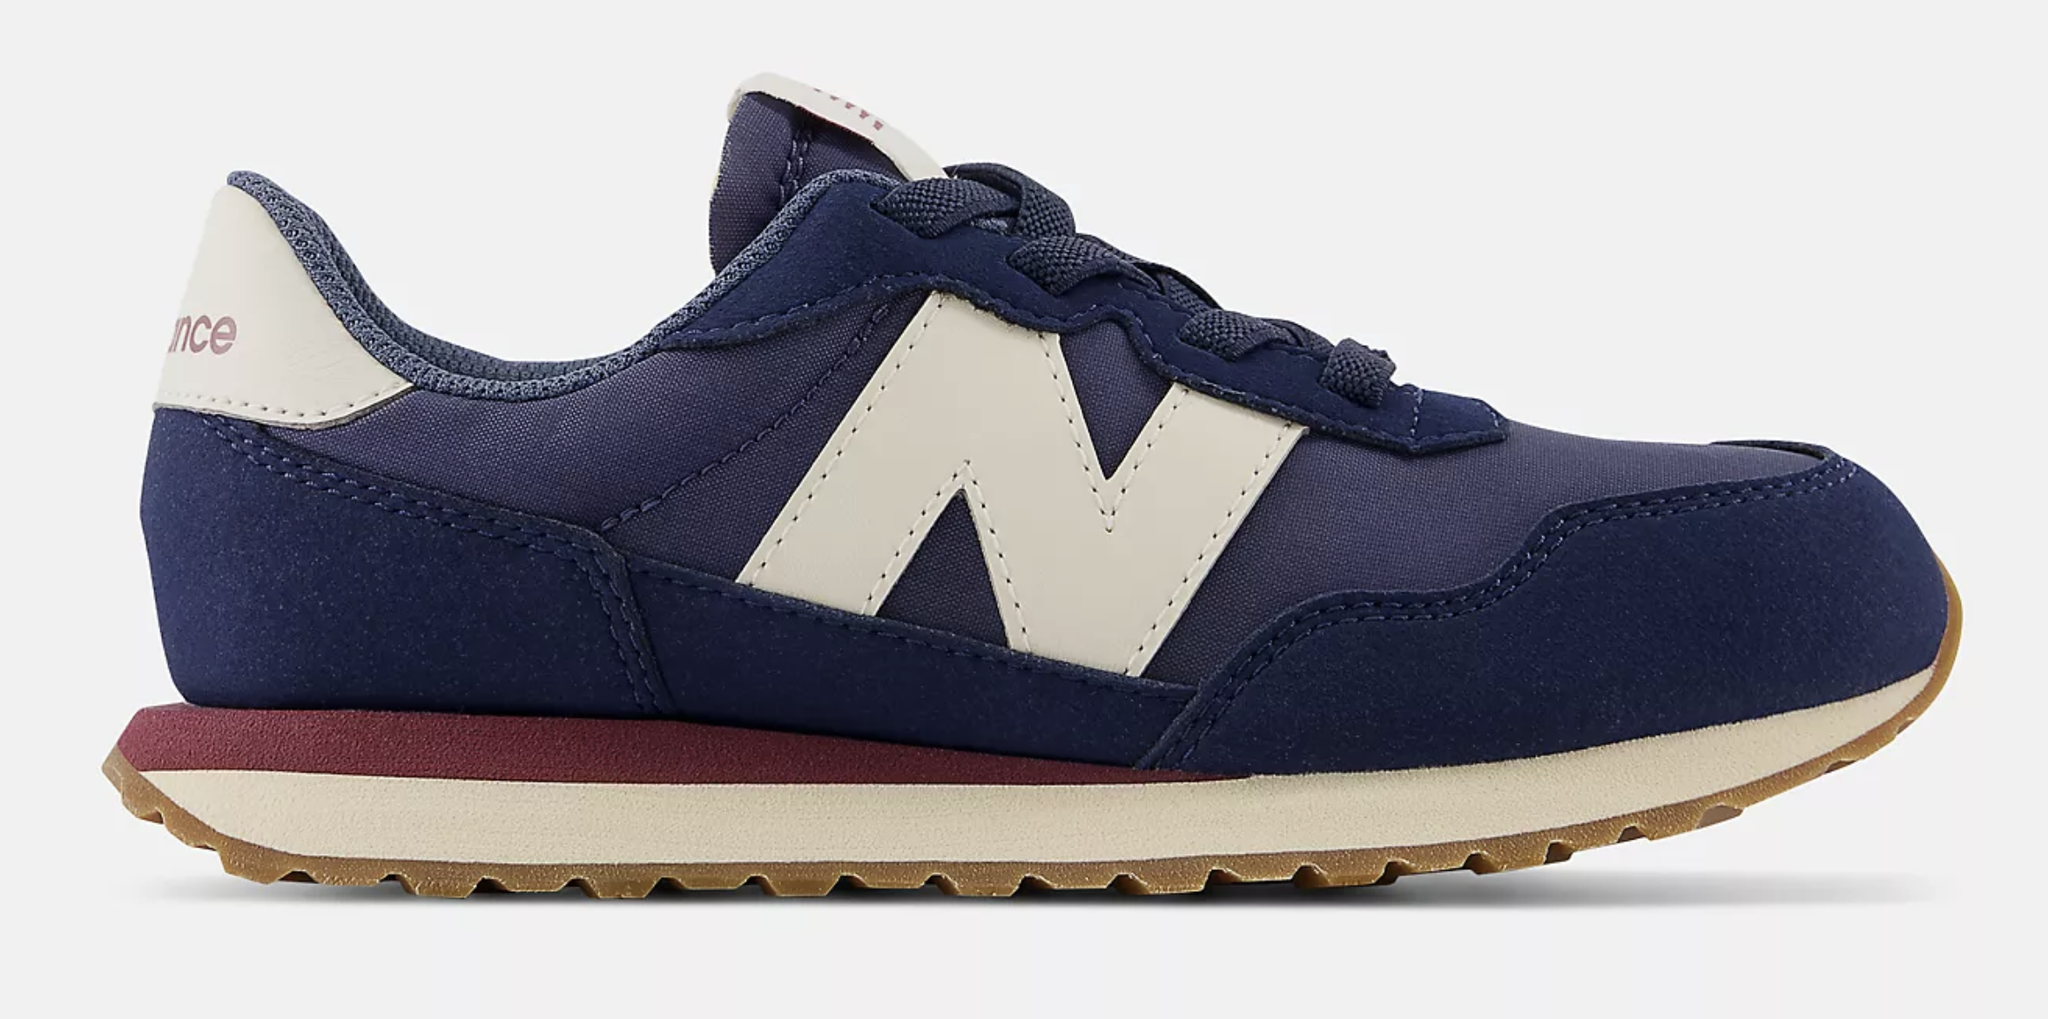 MS237V1 - NAVY WITH TURTLE DOVE SALE